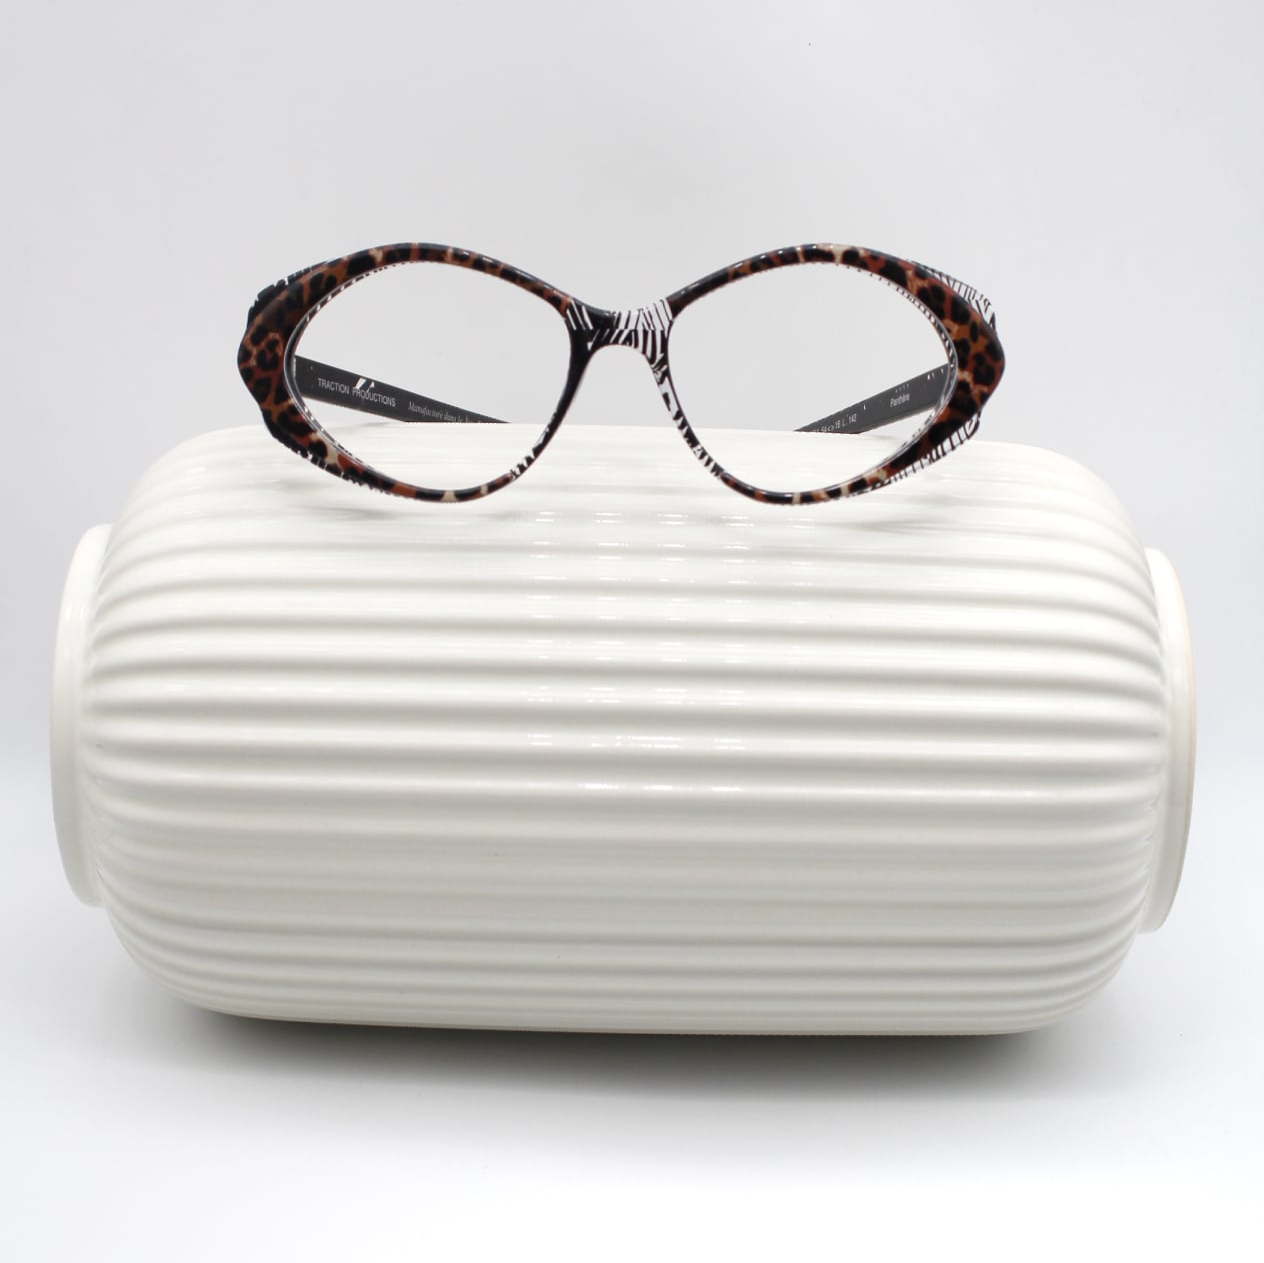 Traction Productions eyeglass frame on white decorative object